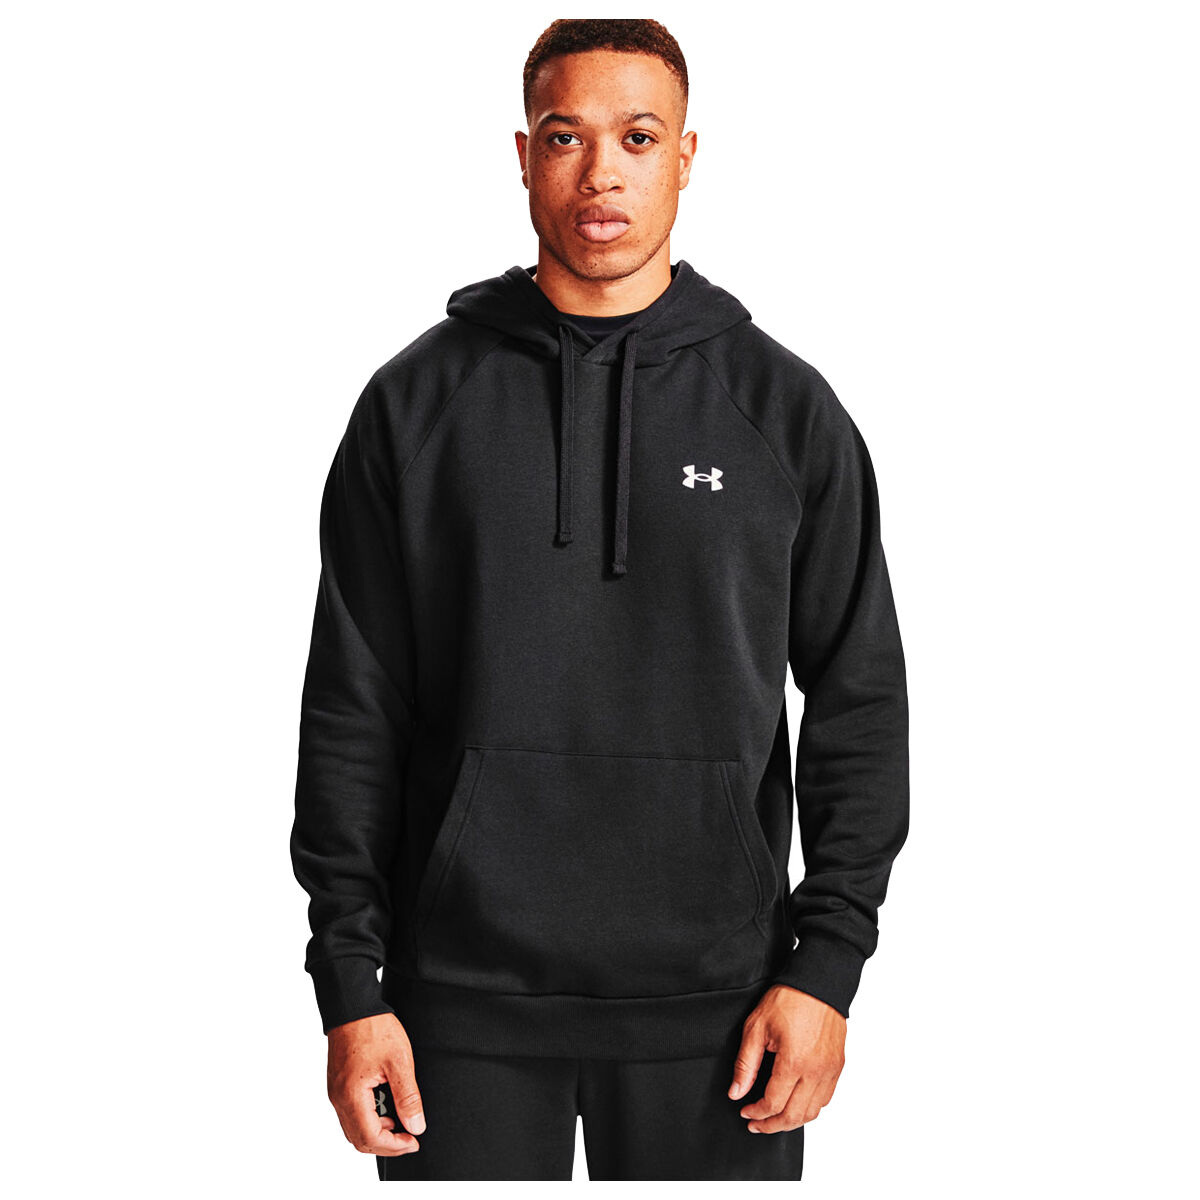 Under Armour Hoodies for sale in Perth, Western Australia